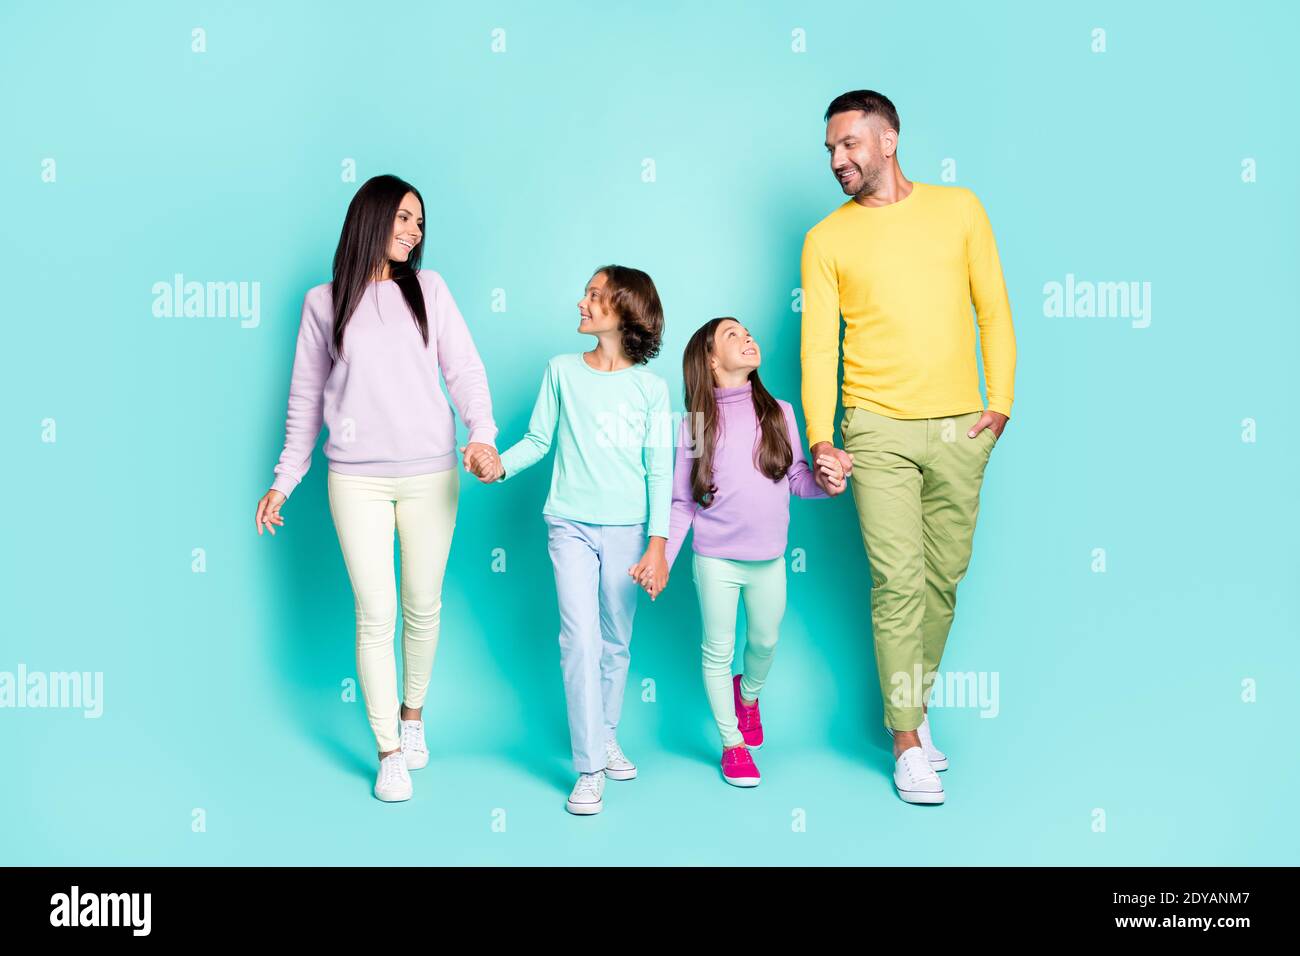 Photo portrait of full family looking at each other holding hands walking isolated on vivid cyan colored background Stock Photo